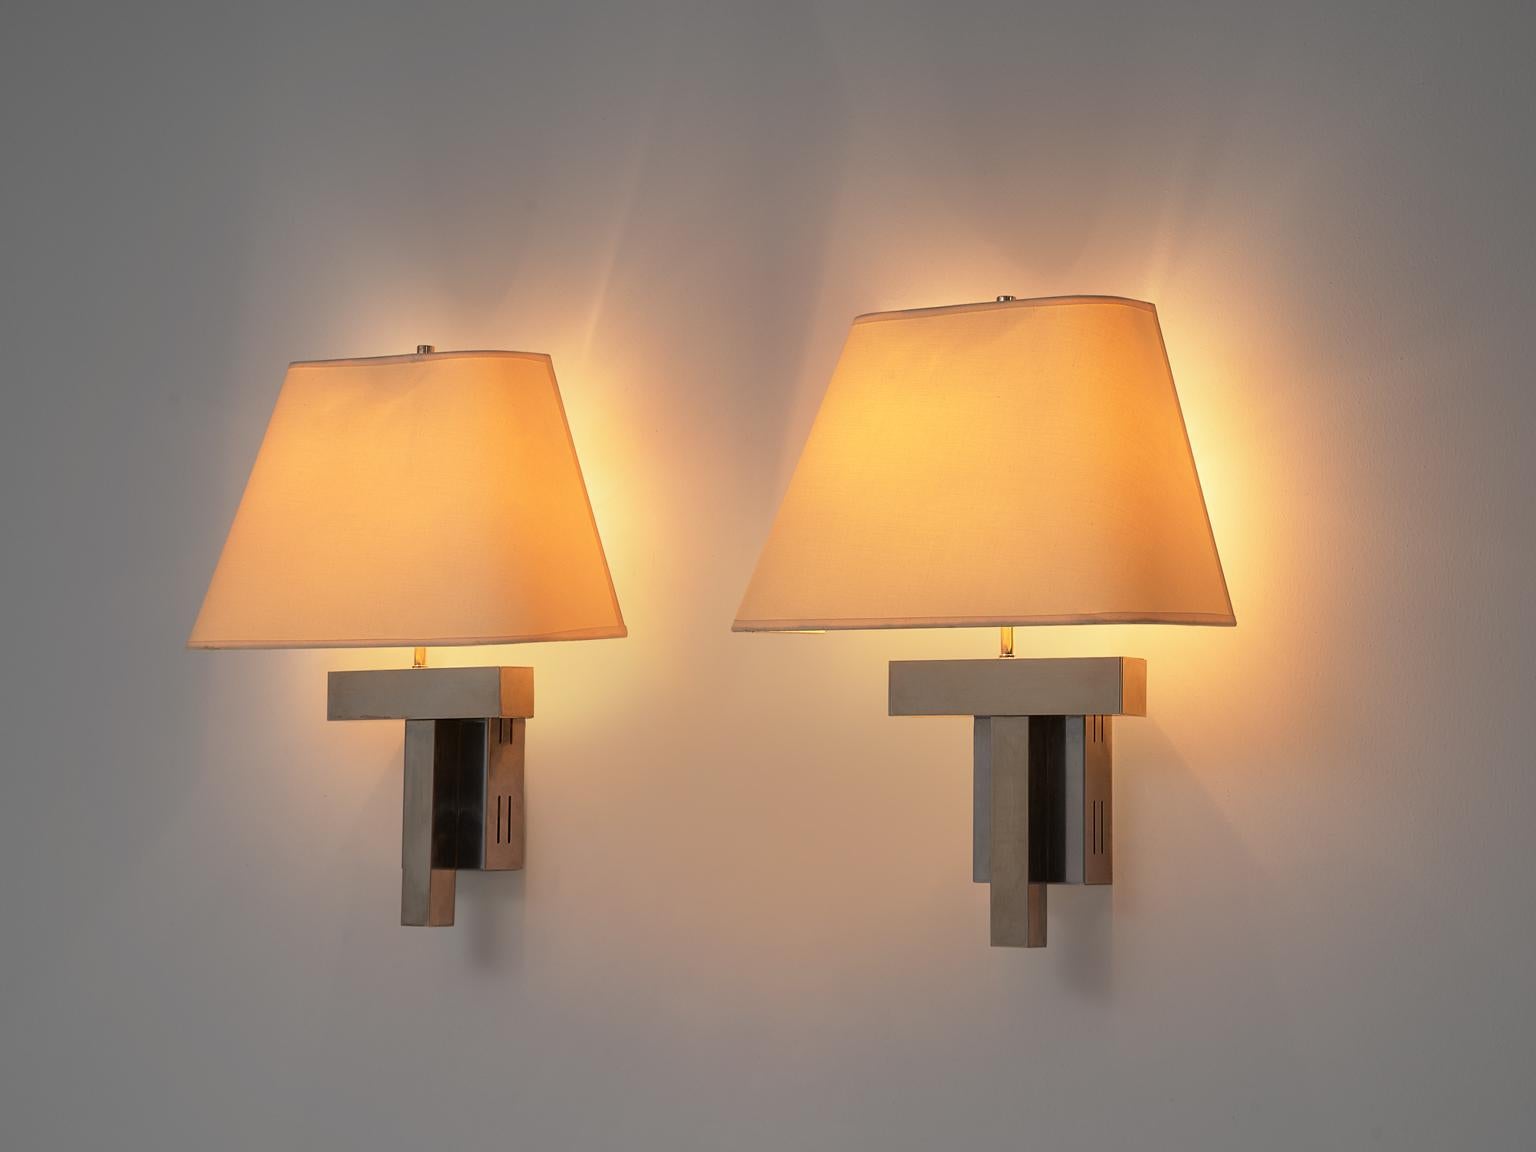 Wall lights, chrome-plated metal, canvas, paper, Europe, 1970s

These wall-mounted light shades feature a modest design that will lighten up one's interior in a delightful manner. Remarkable detail is the cubist shaped frame that embodies sharp